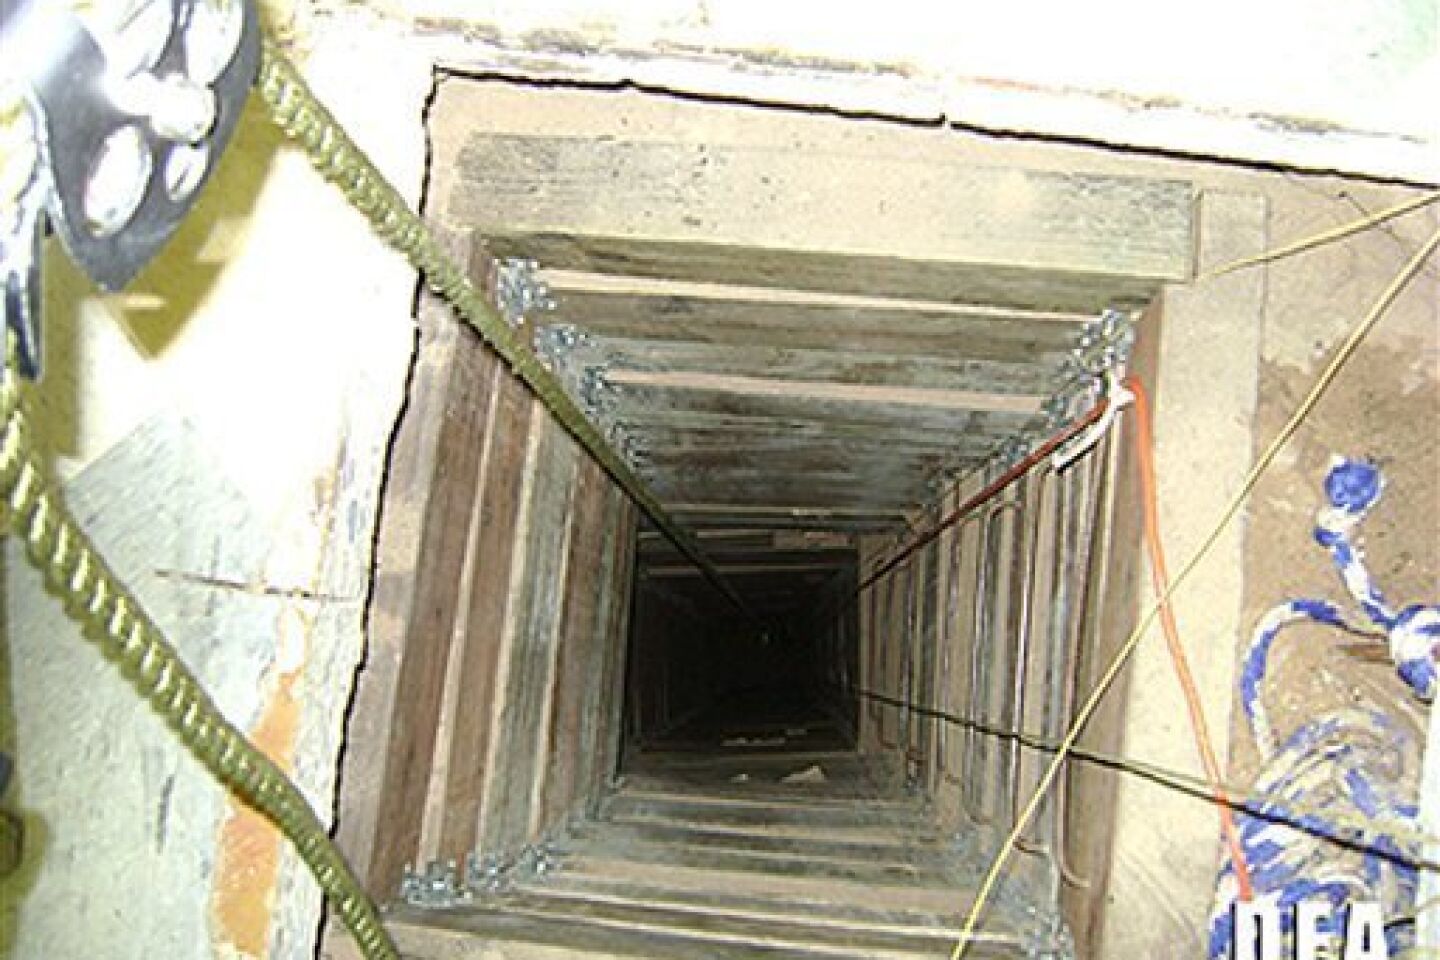 In this undated photo provided by the United States Drug Enforcement Administration, shows the tunnel shaft entrance on the U.S. side of a 240-yard, complete and fully operational drug smuggling tunnel that ran from a small business in Arizona to an ice plant on the Mexico side of the border, Thurs